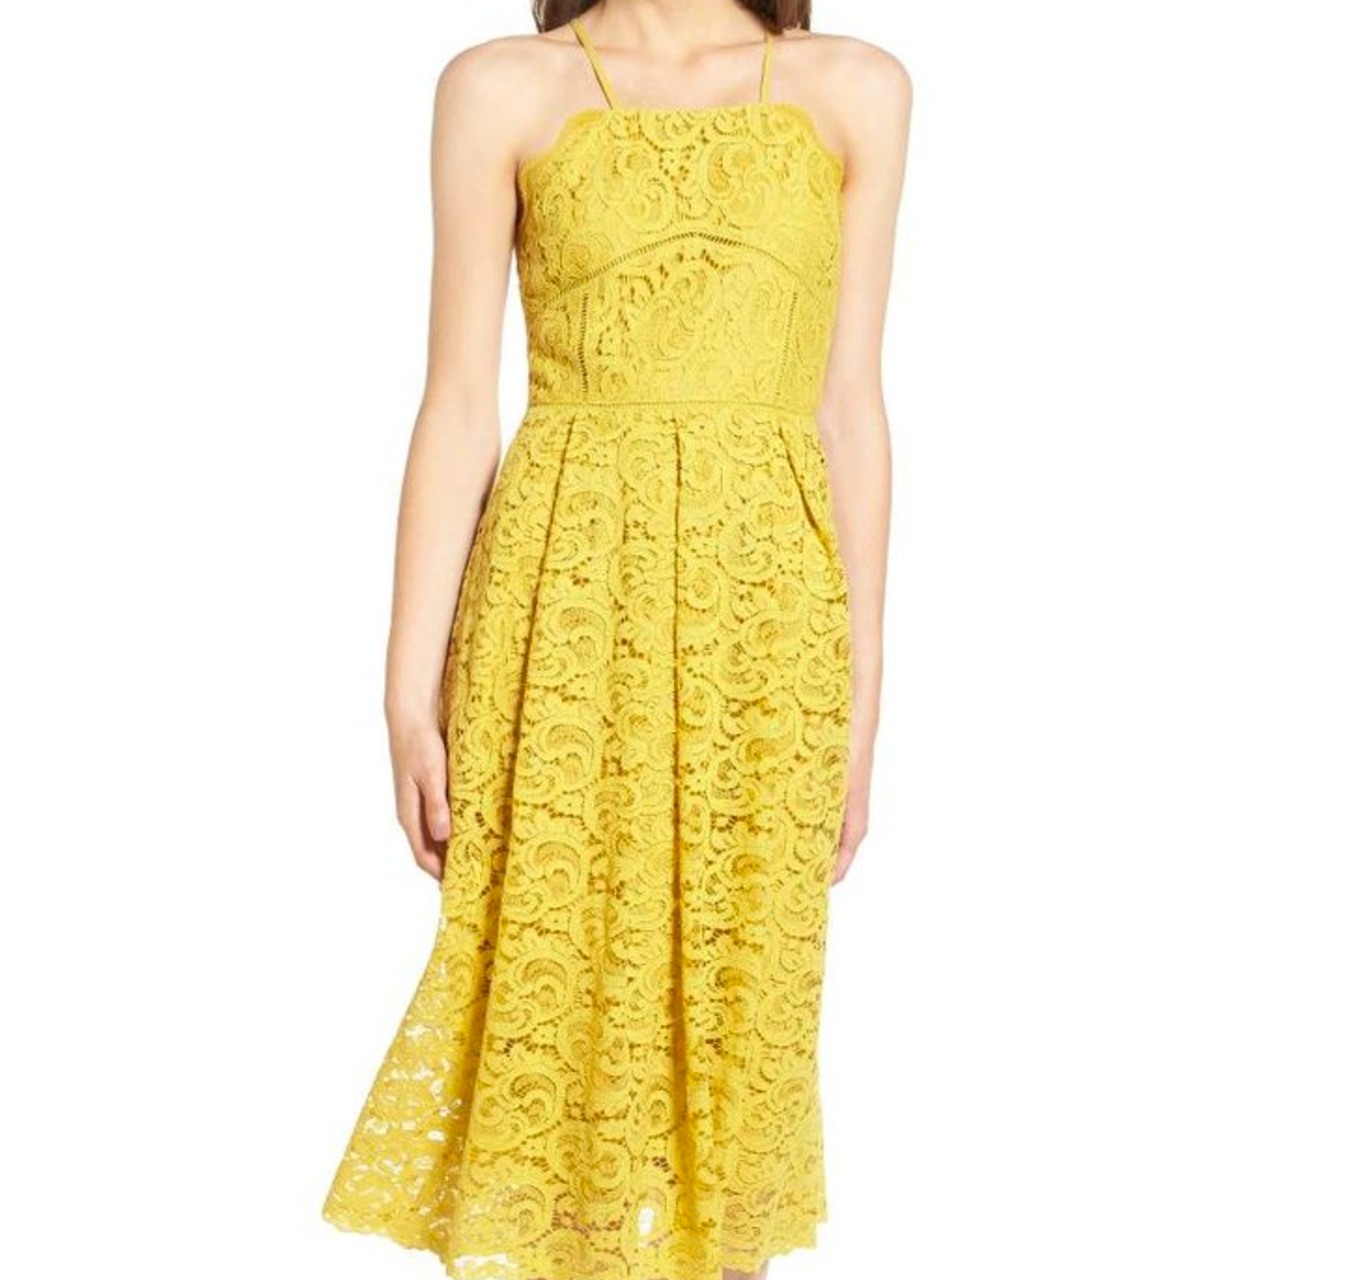 All Of These Gorgeous Lace Dresses Are Under $60 | Essence